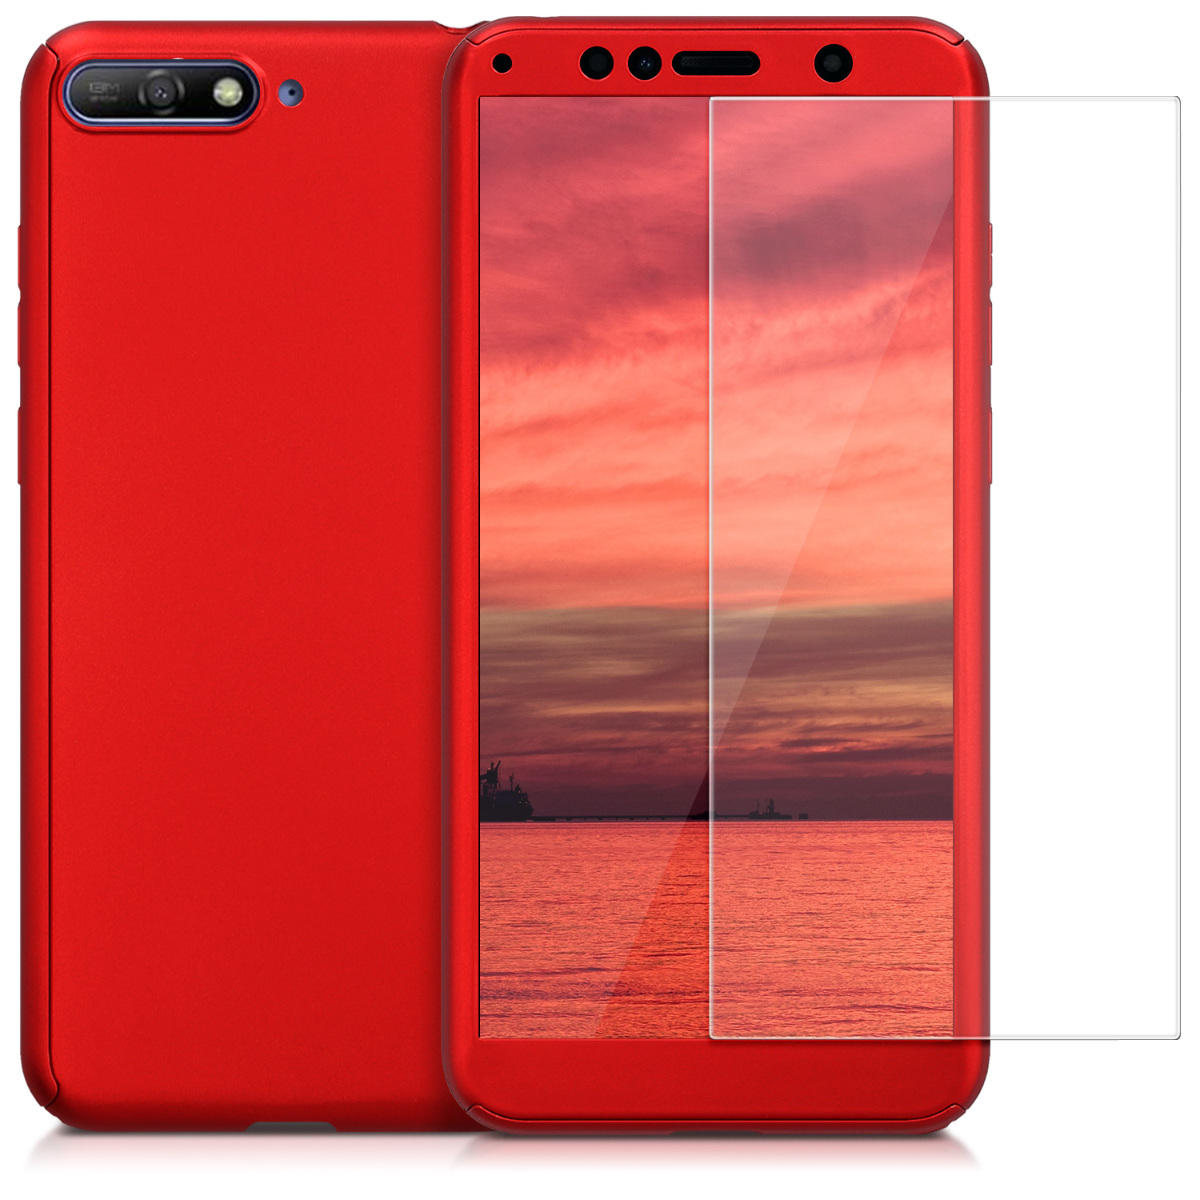 double coque huawei y6 2018